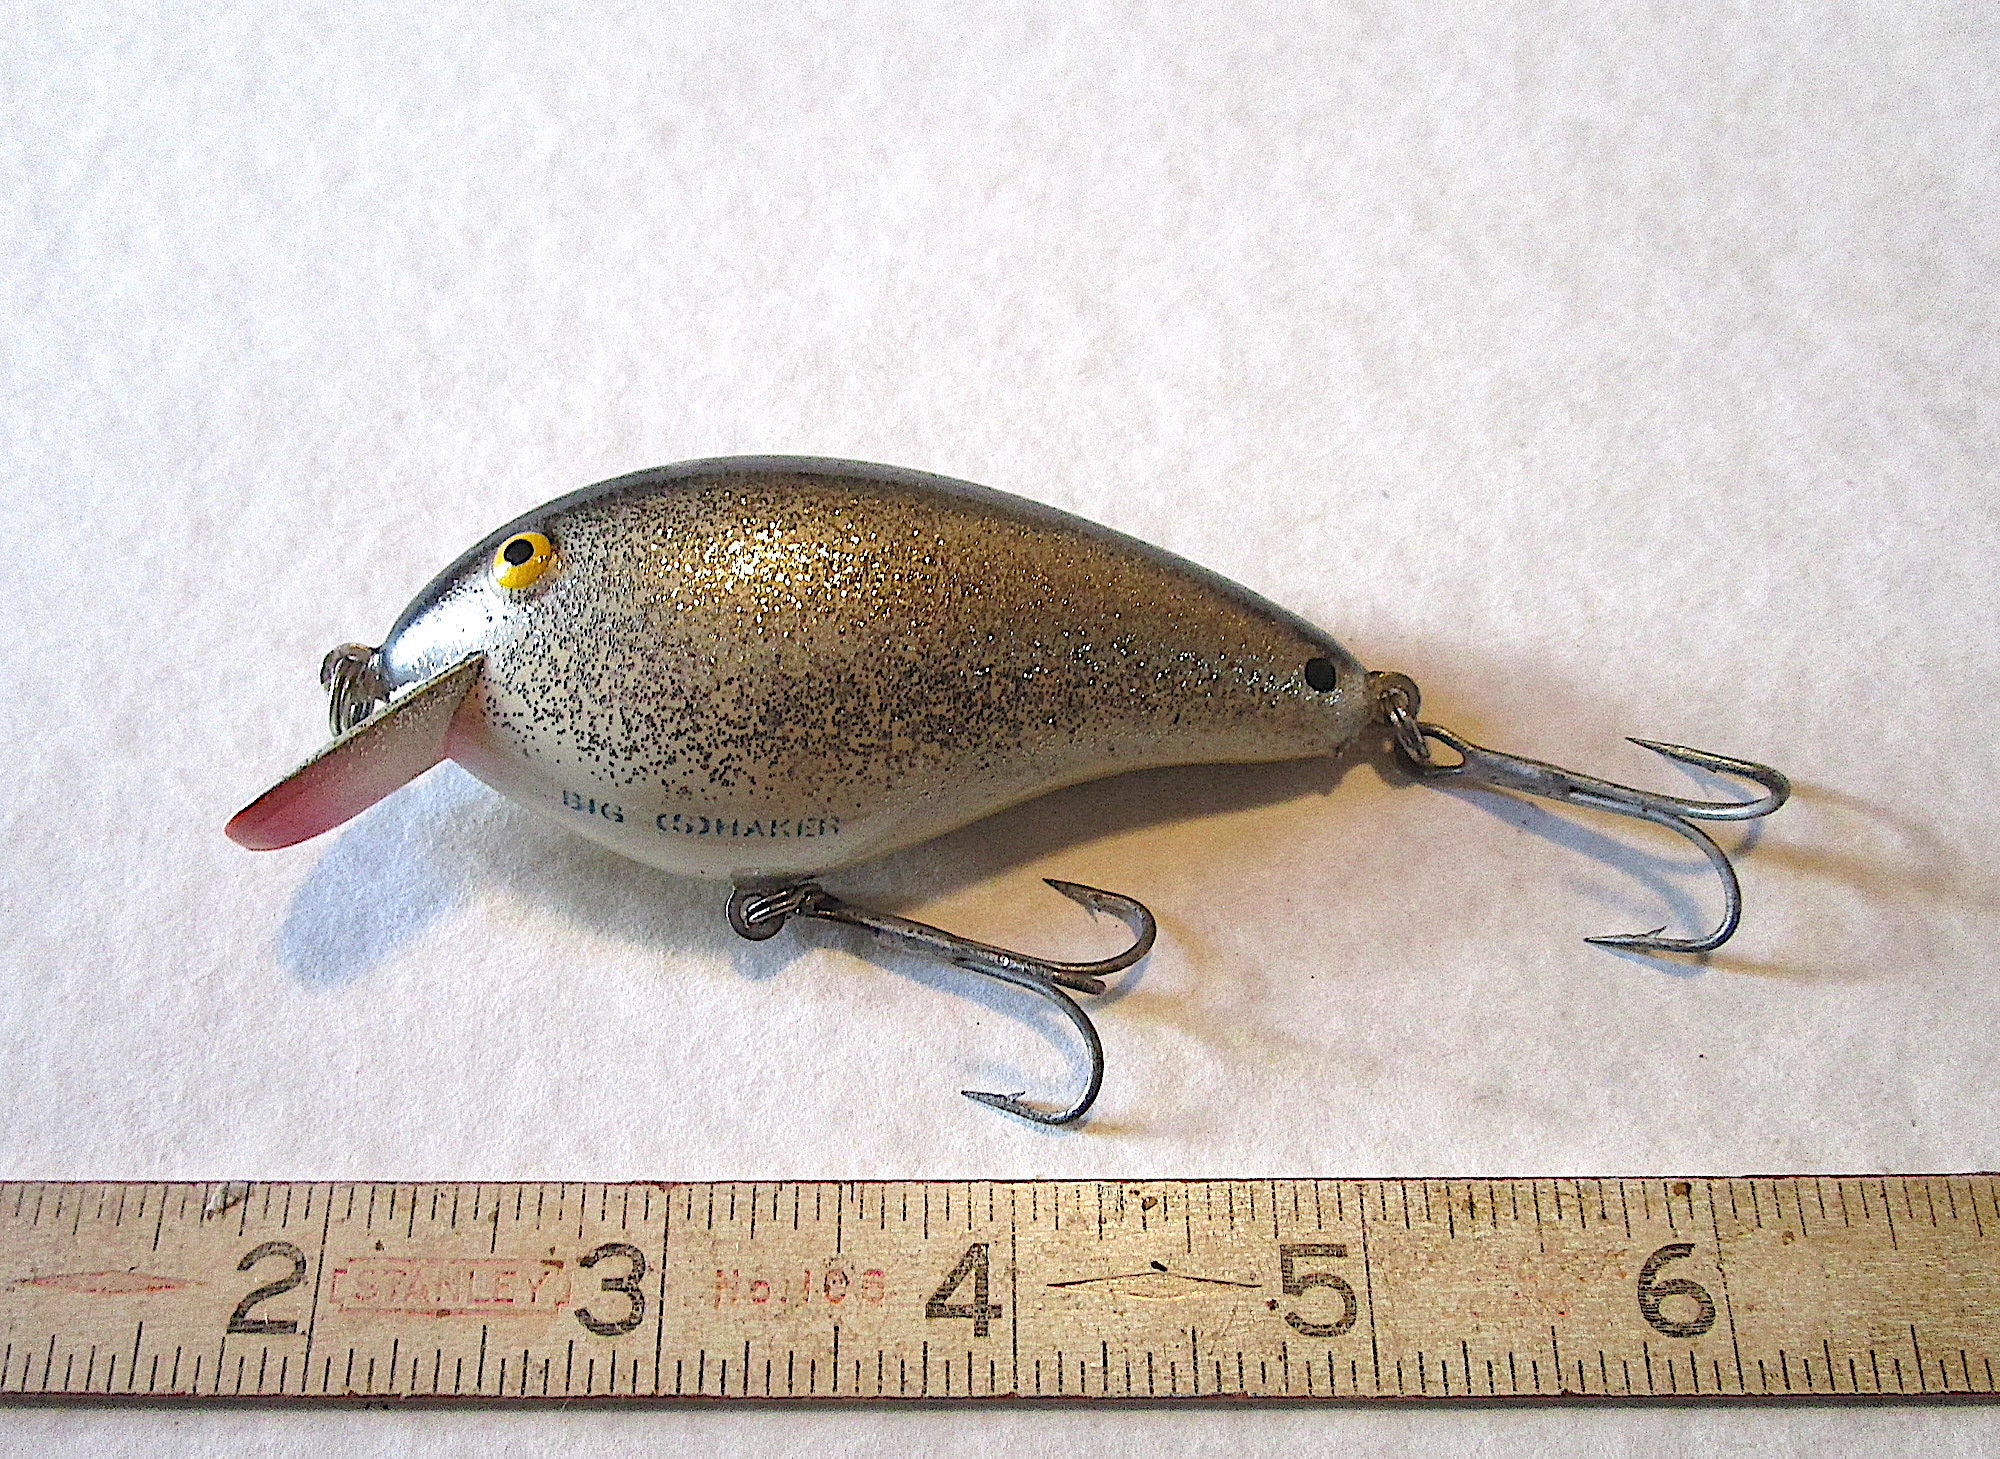 TU78 big shaker Lure by Shakespeare Vintage Old Fishing Tackle